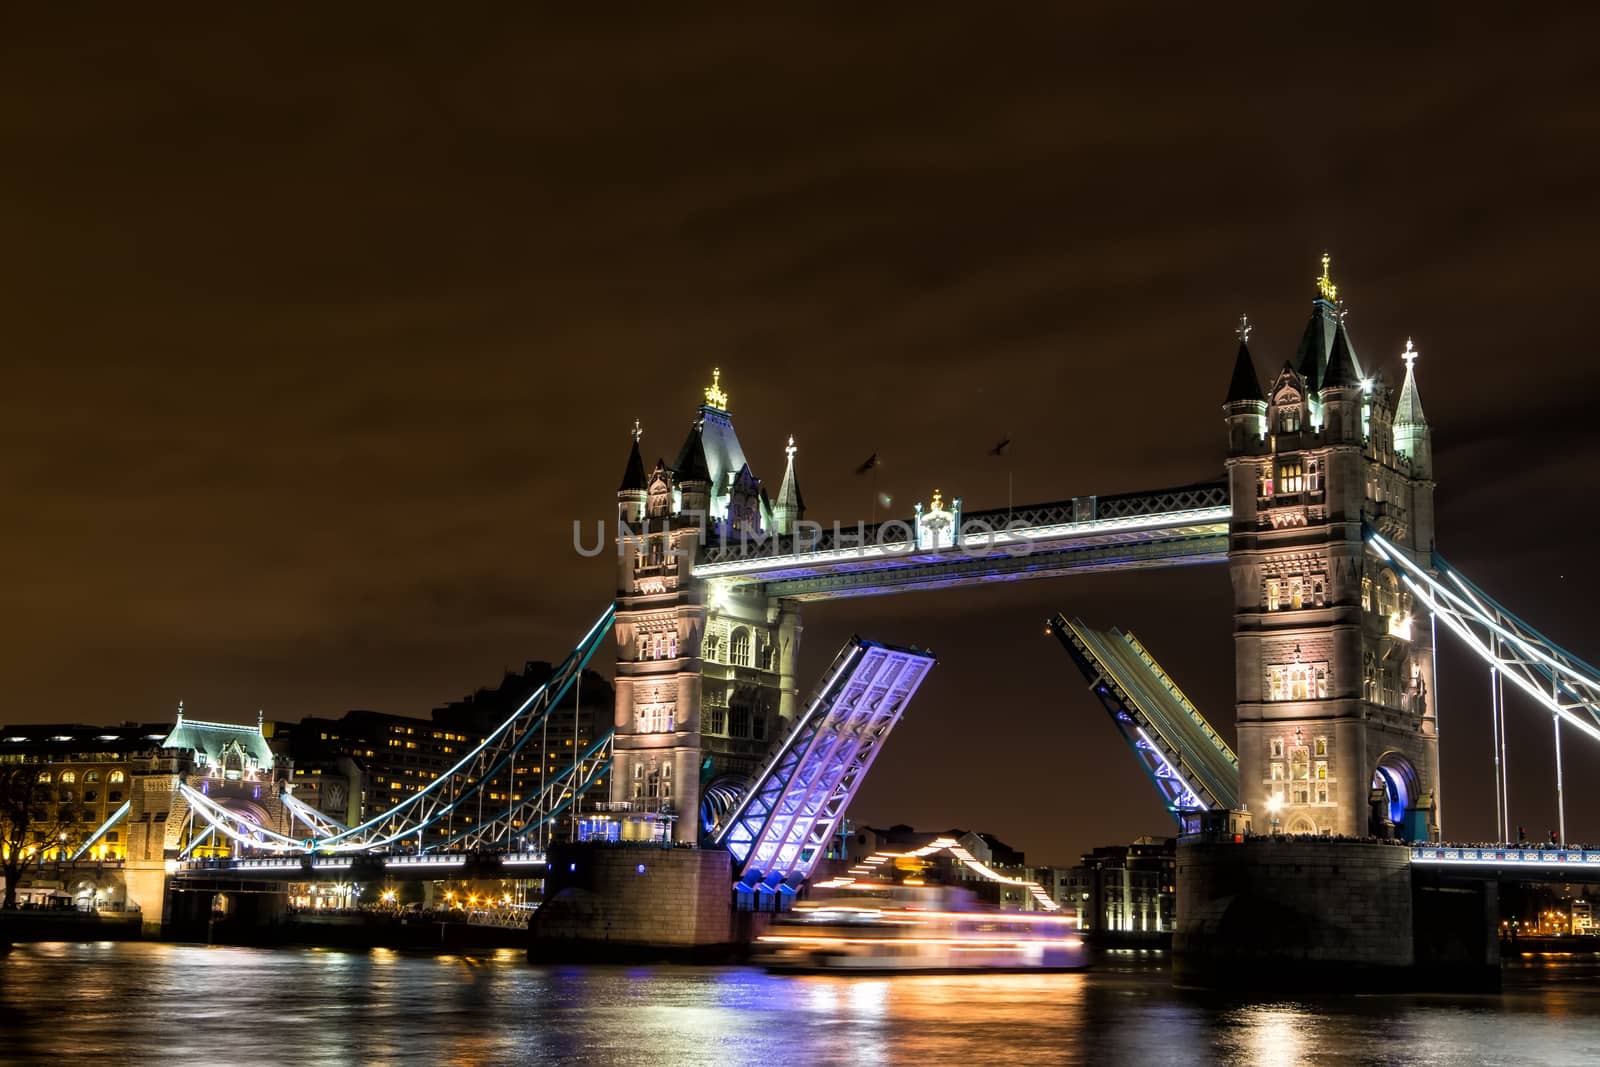 Tower Bridge (built 1886-1894) is a combined bascule and suspension bridge in London which crosses the River Thames.